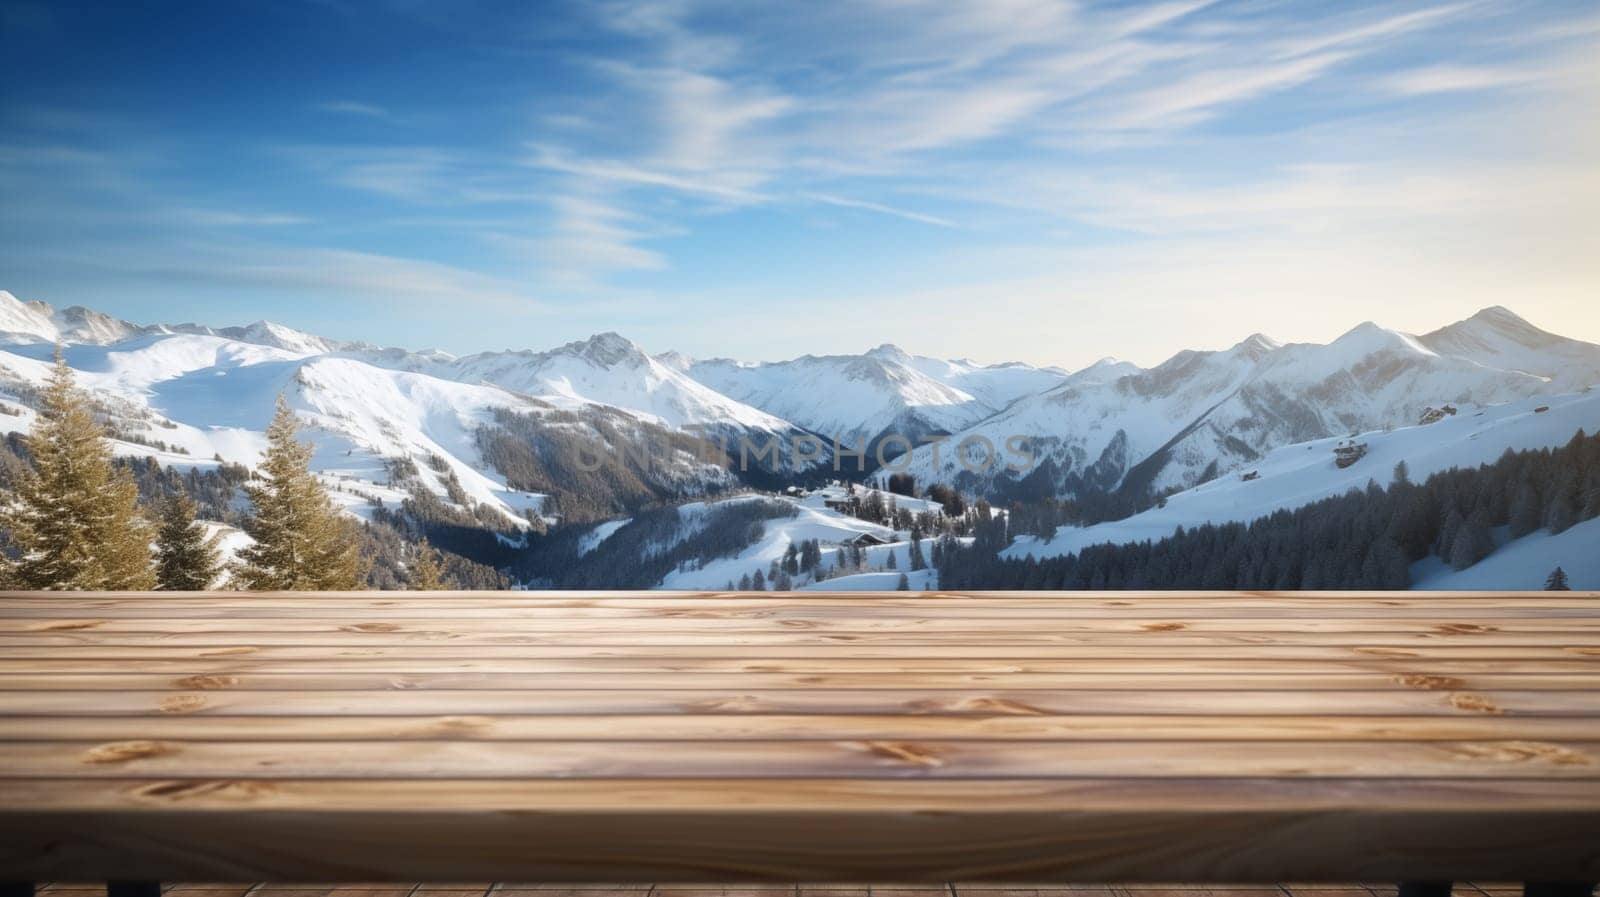 Wooden countertop, empty, with a beautiful view of the snowy mountains and blue sky.